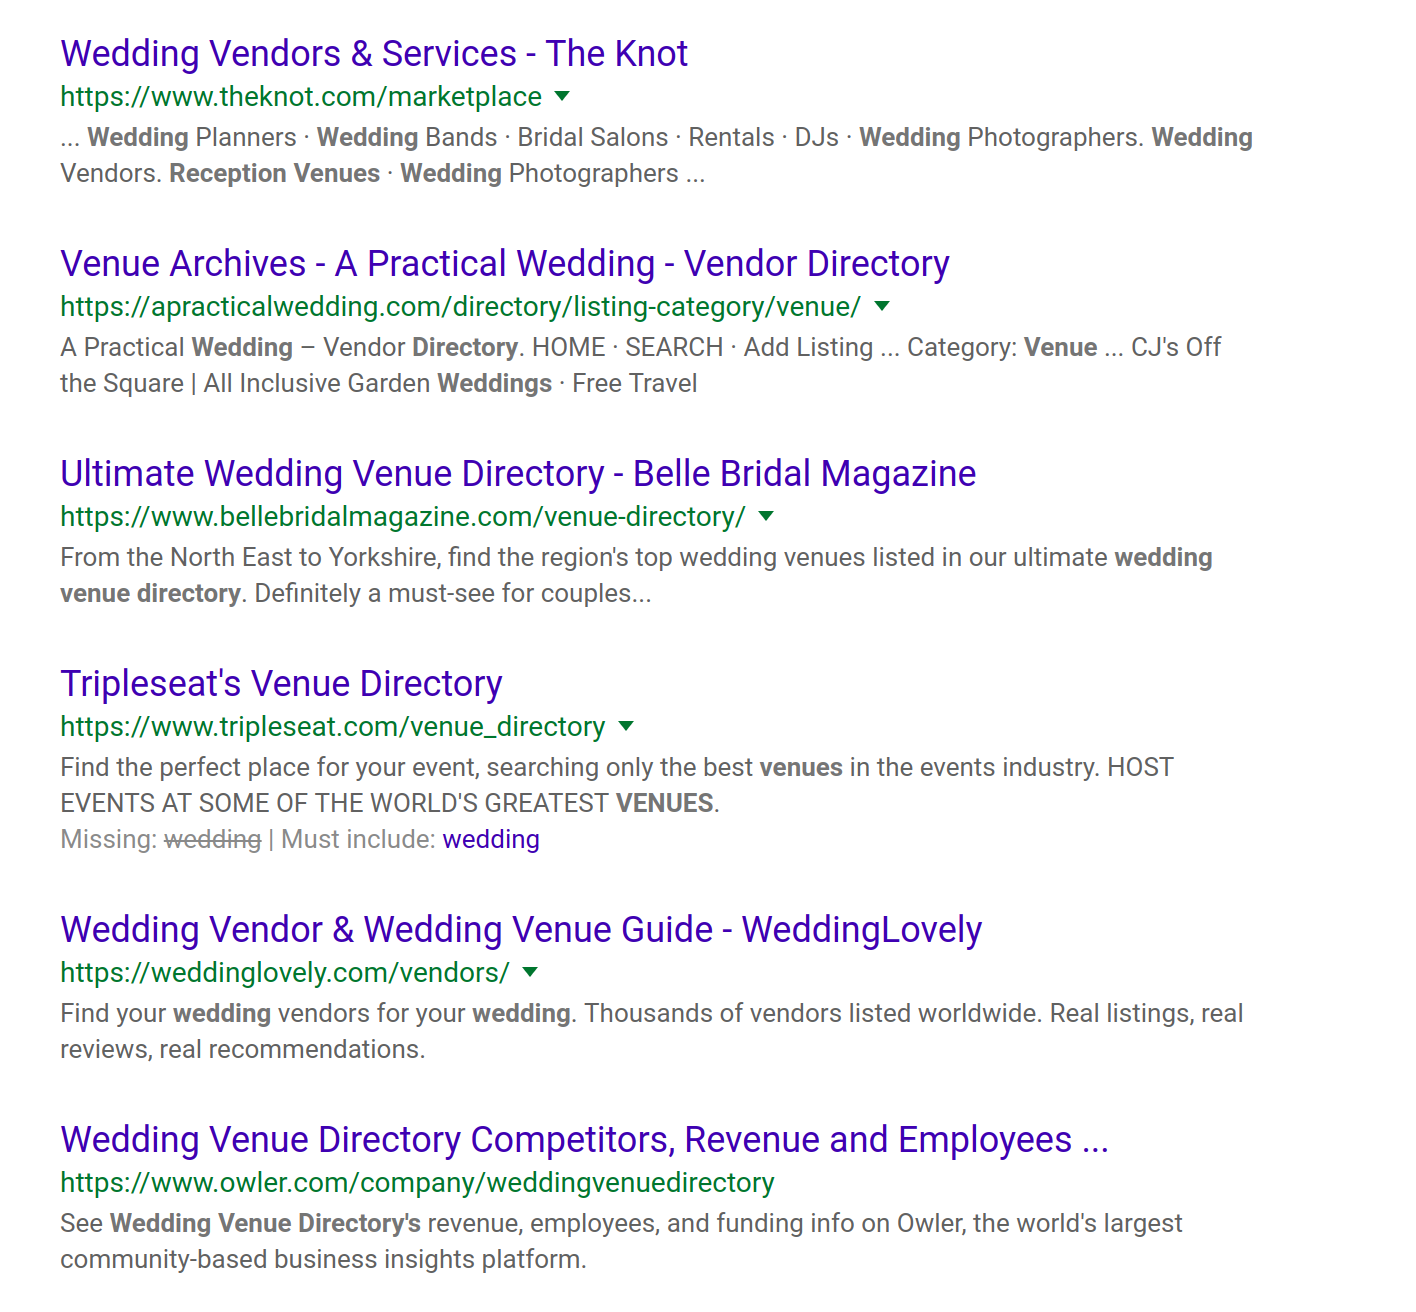 Google Search Results of Wedding Venue Directories